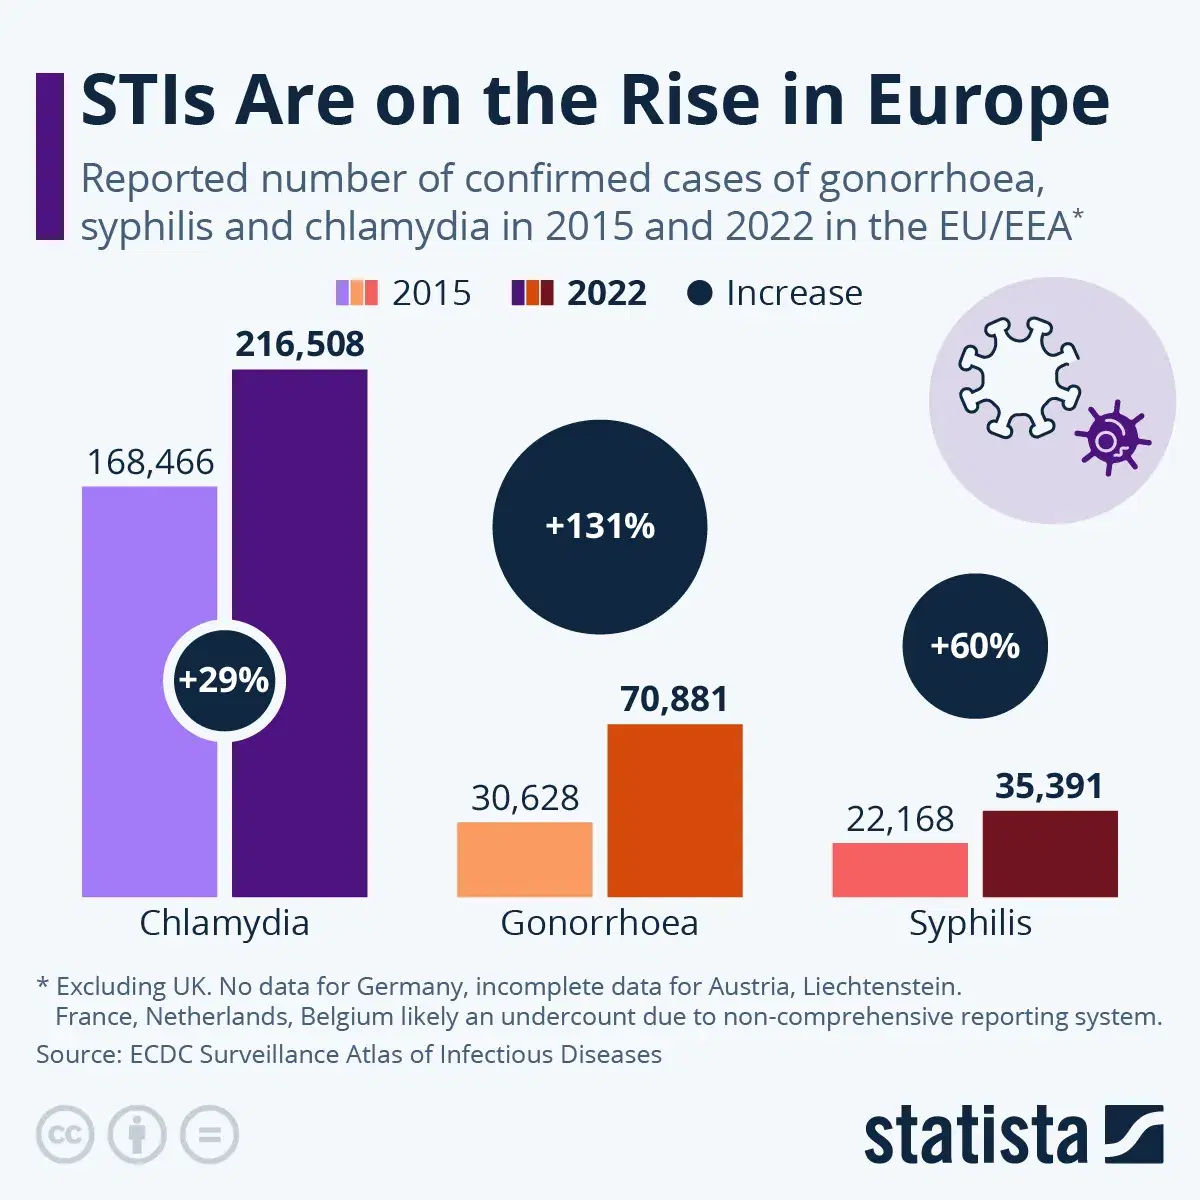 STIs Are on the Rise in Europe